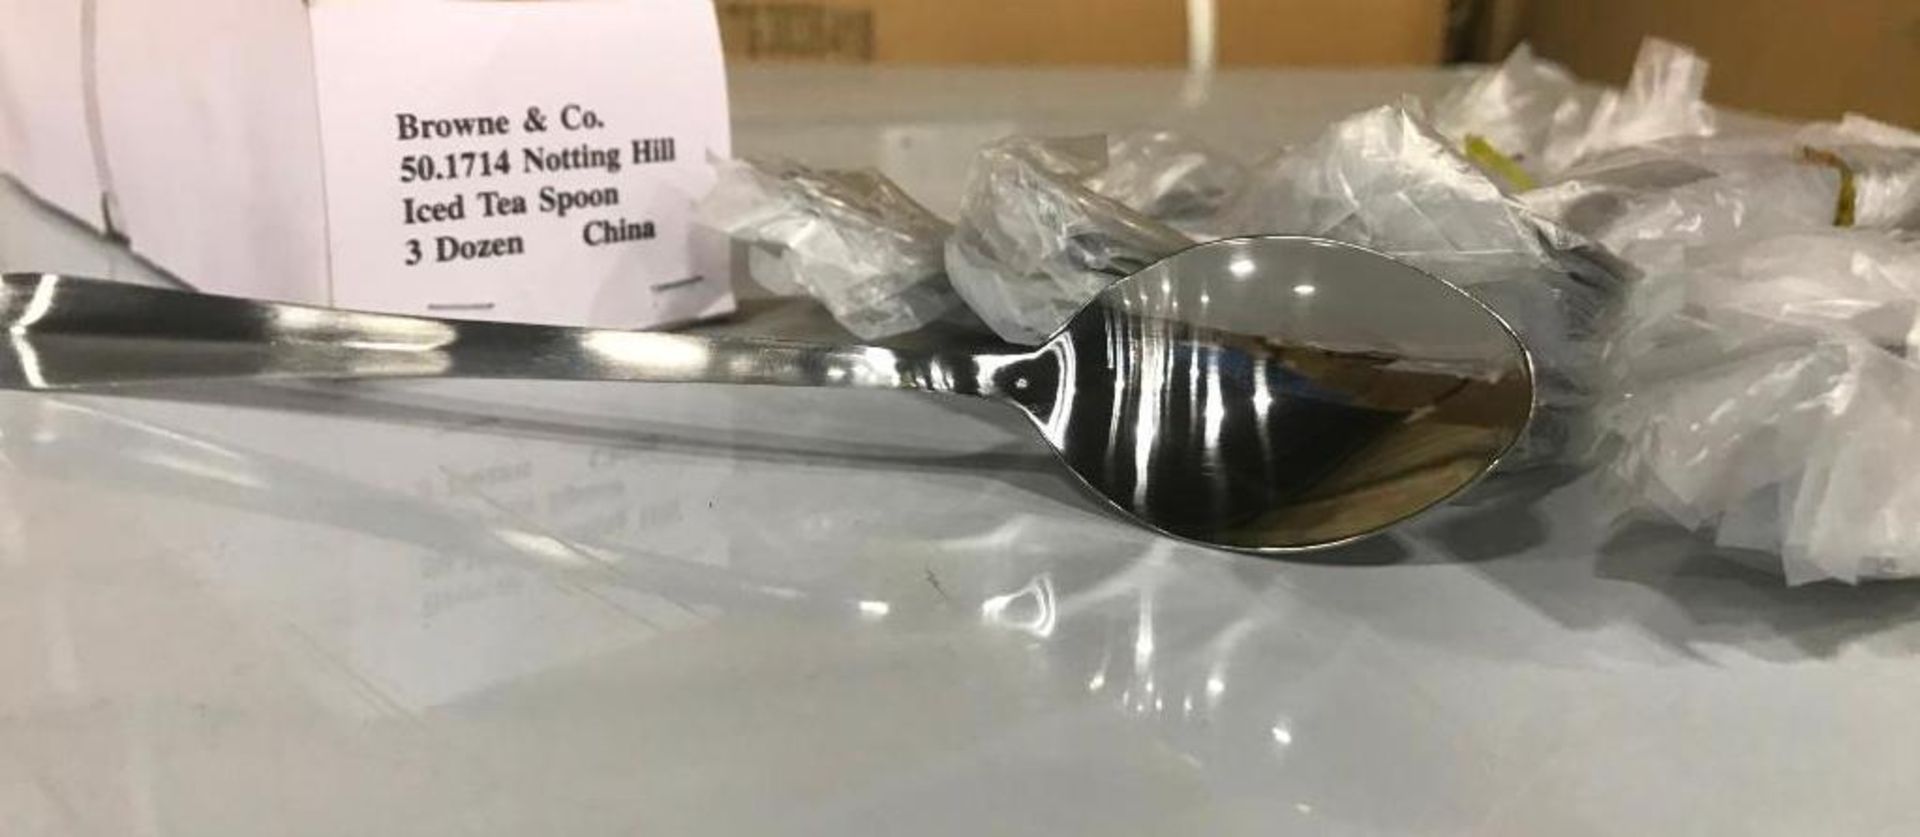 NOTTING HILL ICED TEA SPOON, MIRROR FINISH, STAINLESS STEEL - NEW - LOT OF 36 - Image 3 of 3